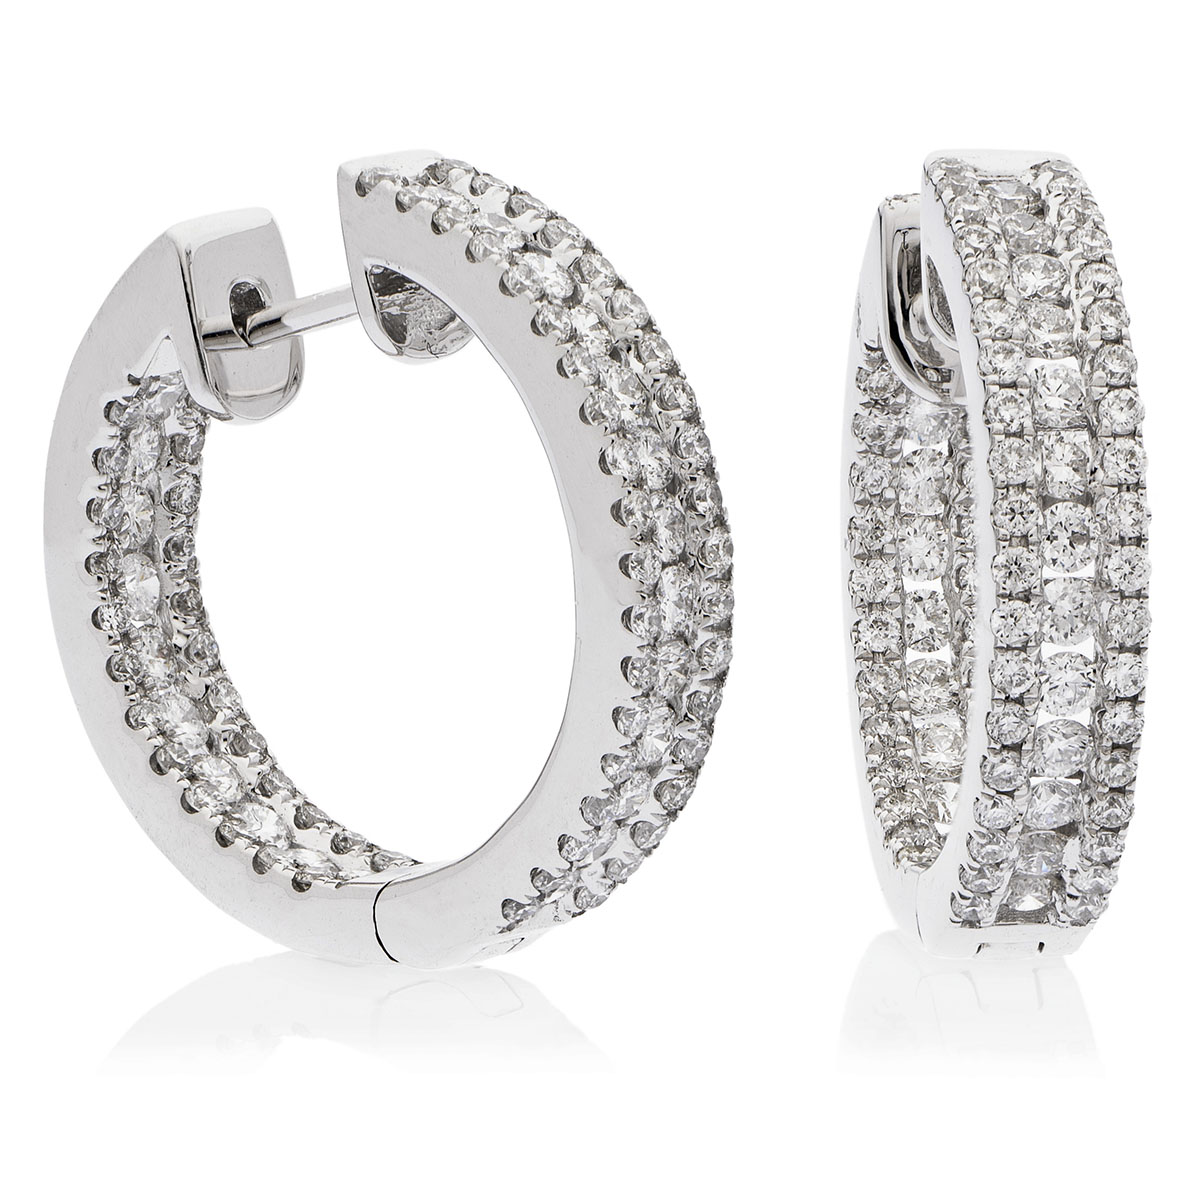 3 Row Pave In And Out Round Diamond Hoops Earrings